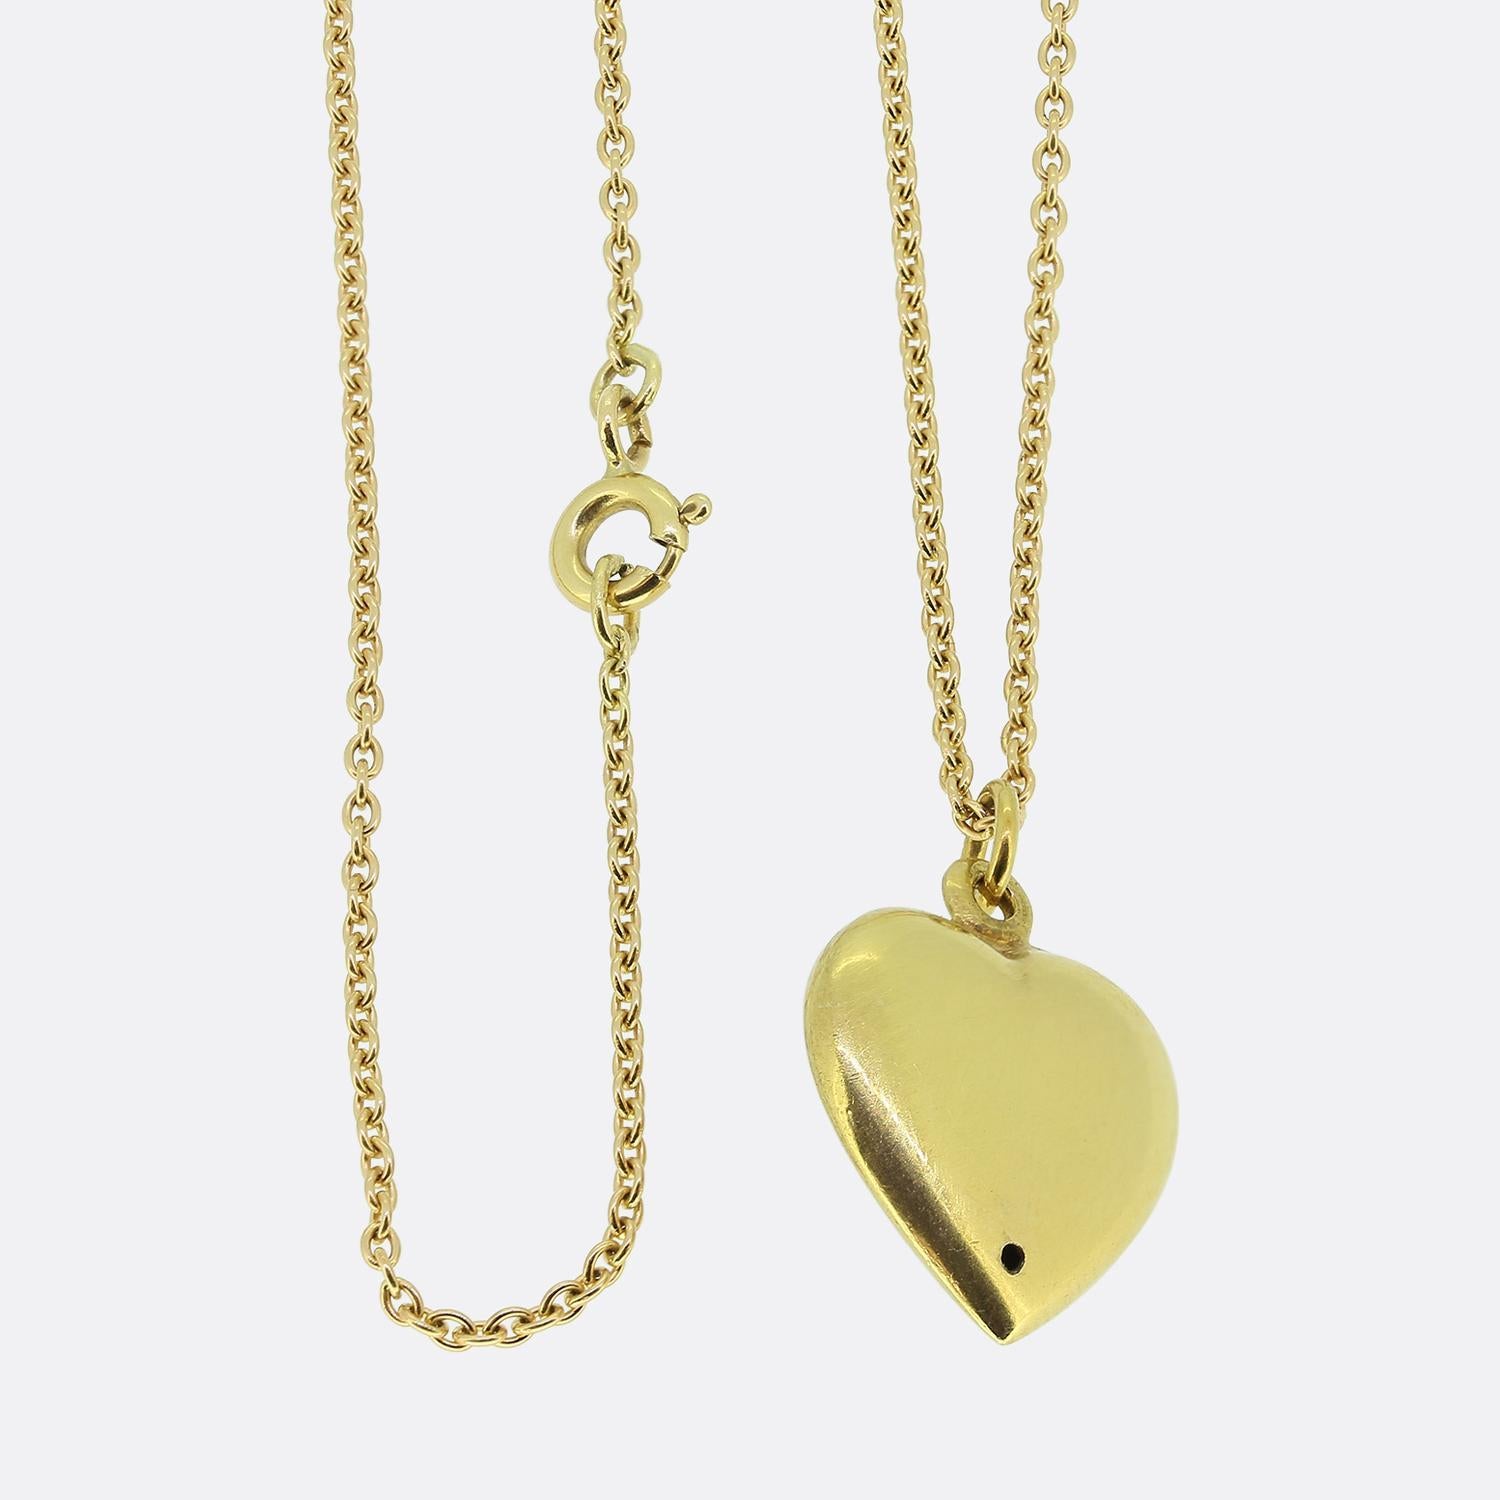 Here we have a beautiful pearl set pendant necklace. This antique pendant has been crafted from 18ct yellow gold into the the shape of a little love heart and expertly set with an array of round natural pearls in a floral formation. This motif sits